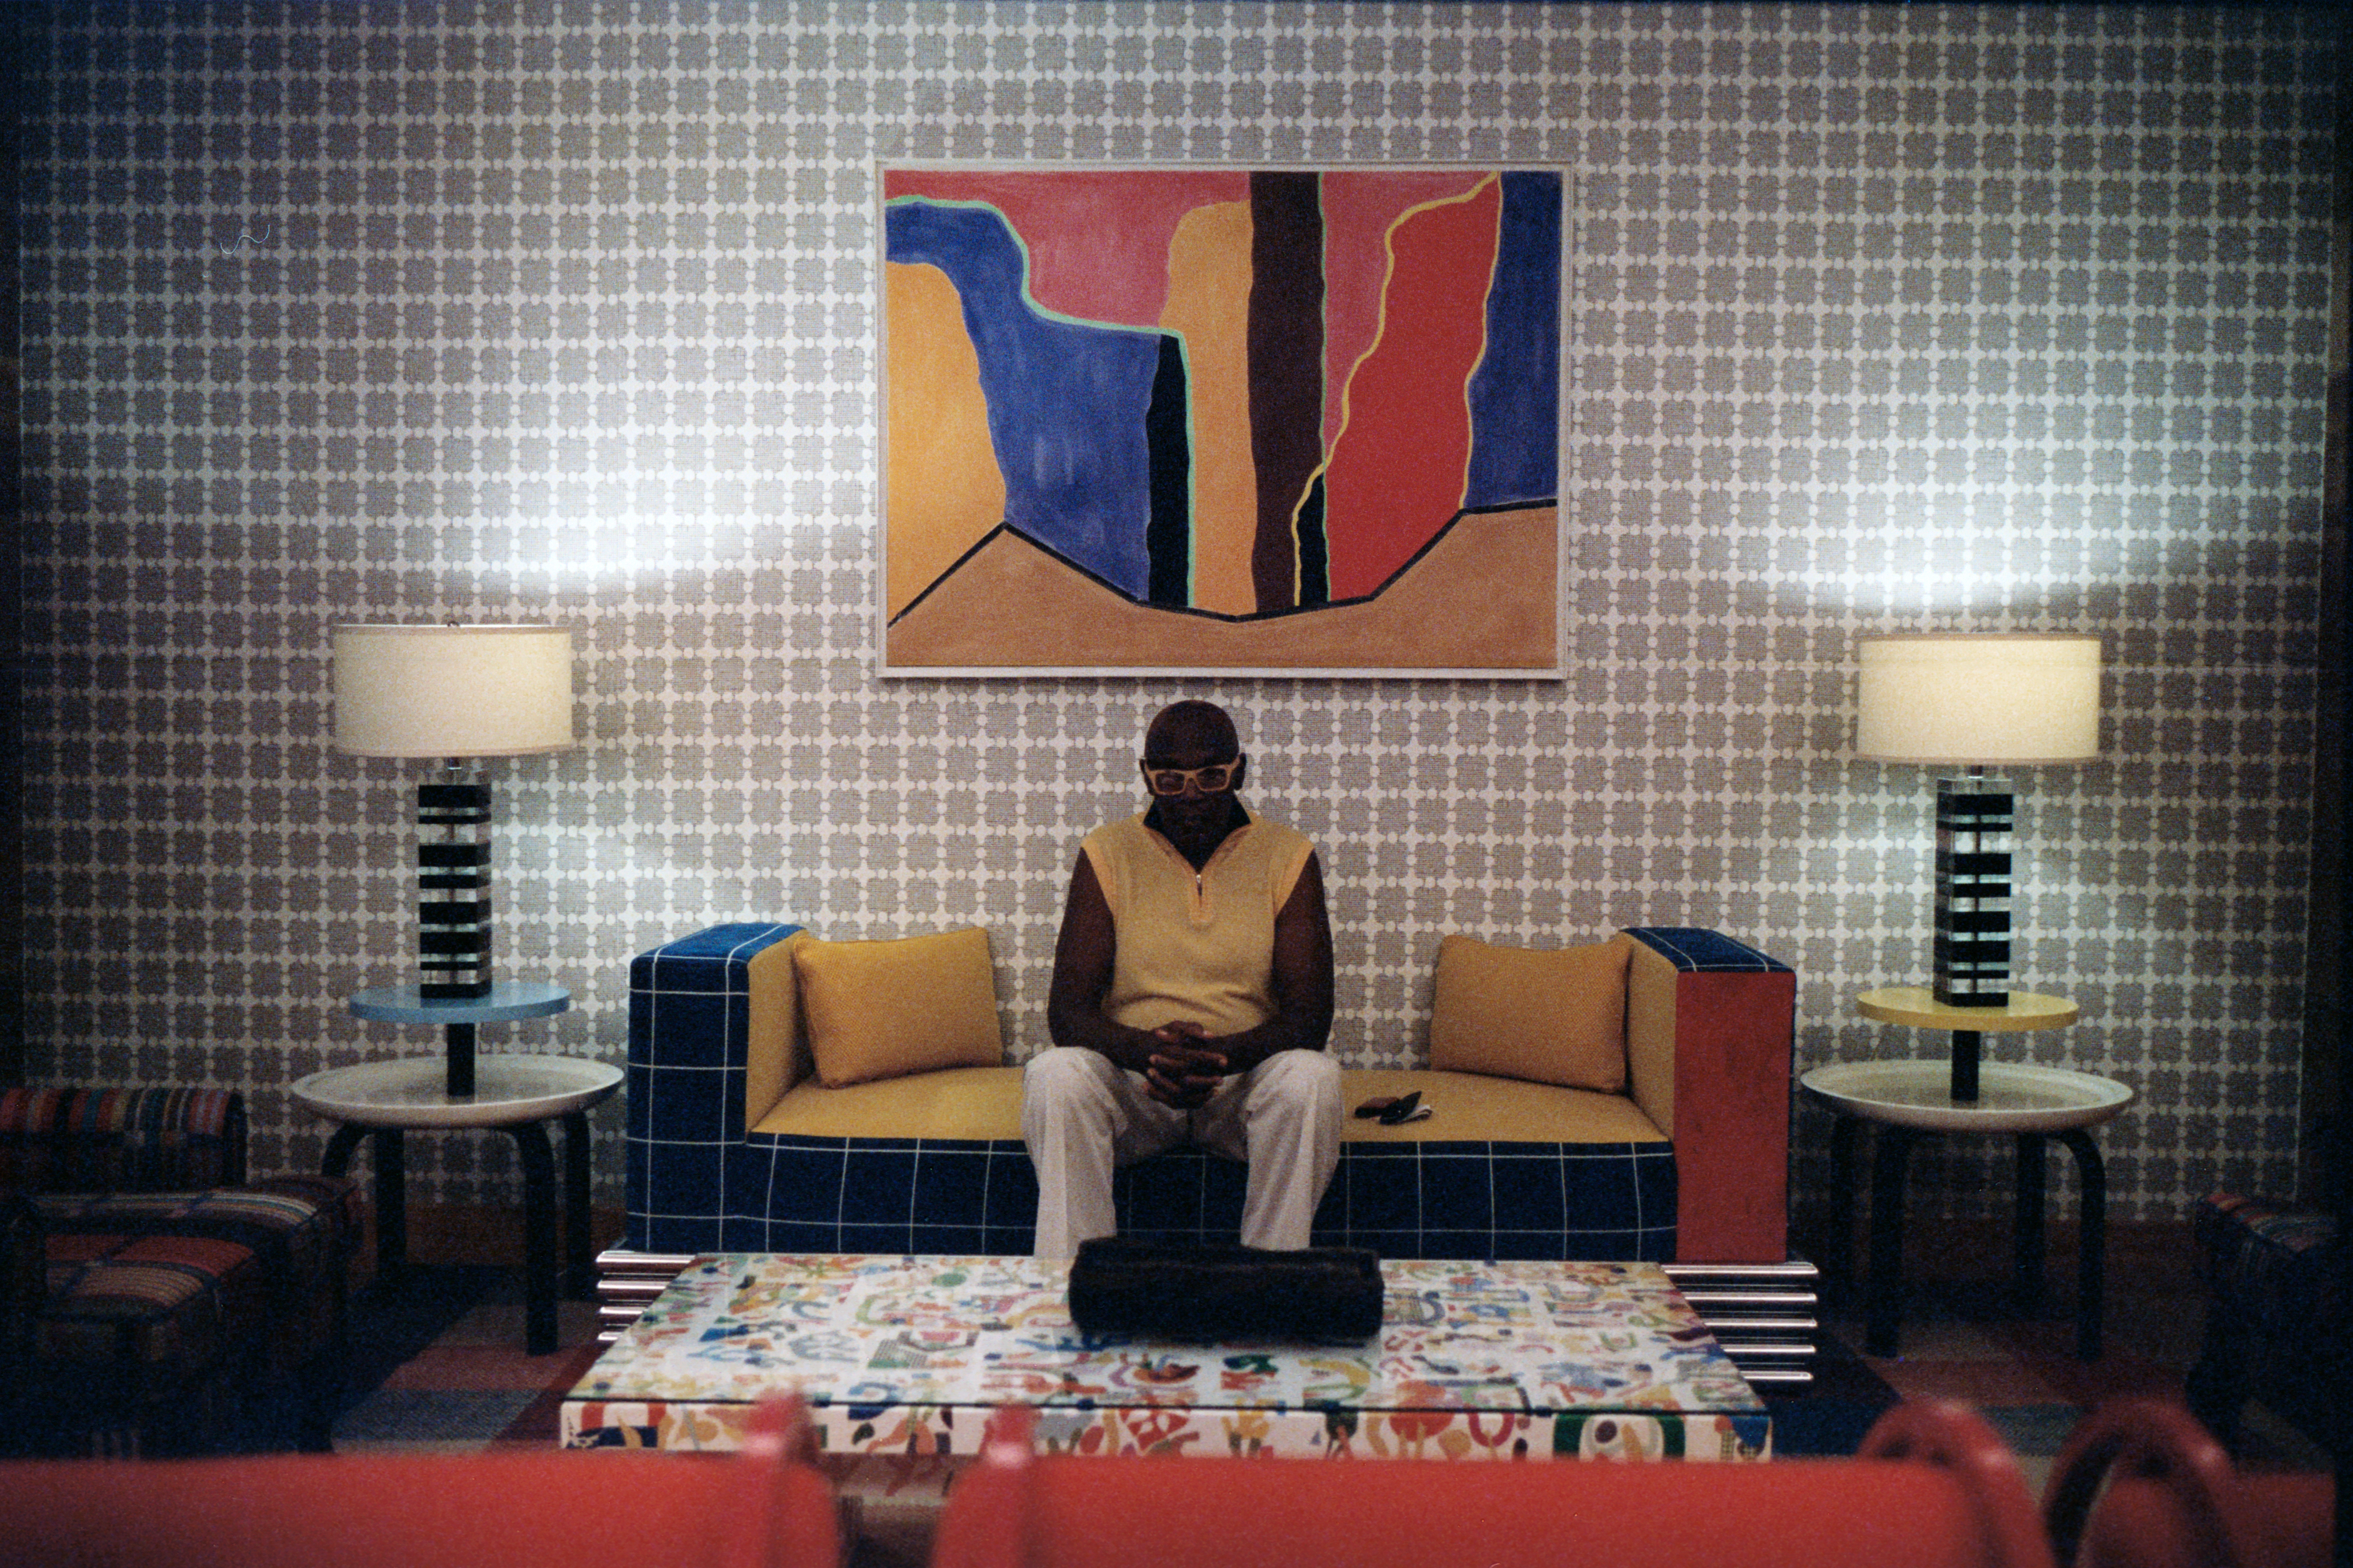 Person sitting on a couch in a retro room, with their hands to themselves. There is a big abstract artwork directly above them on the couch.